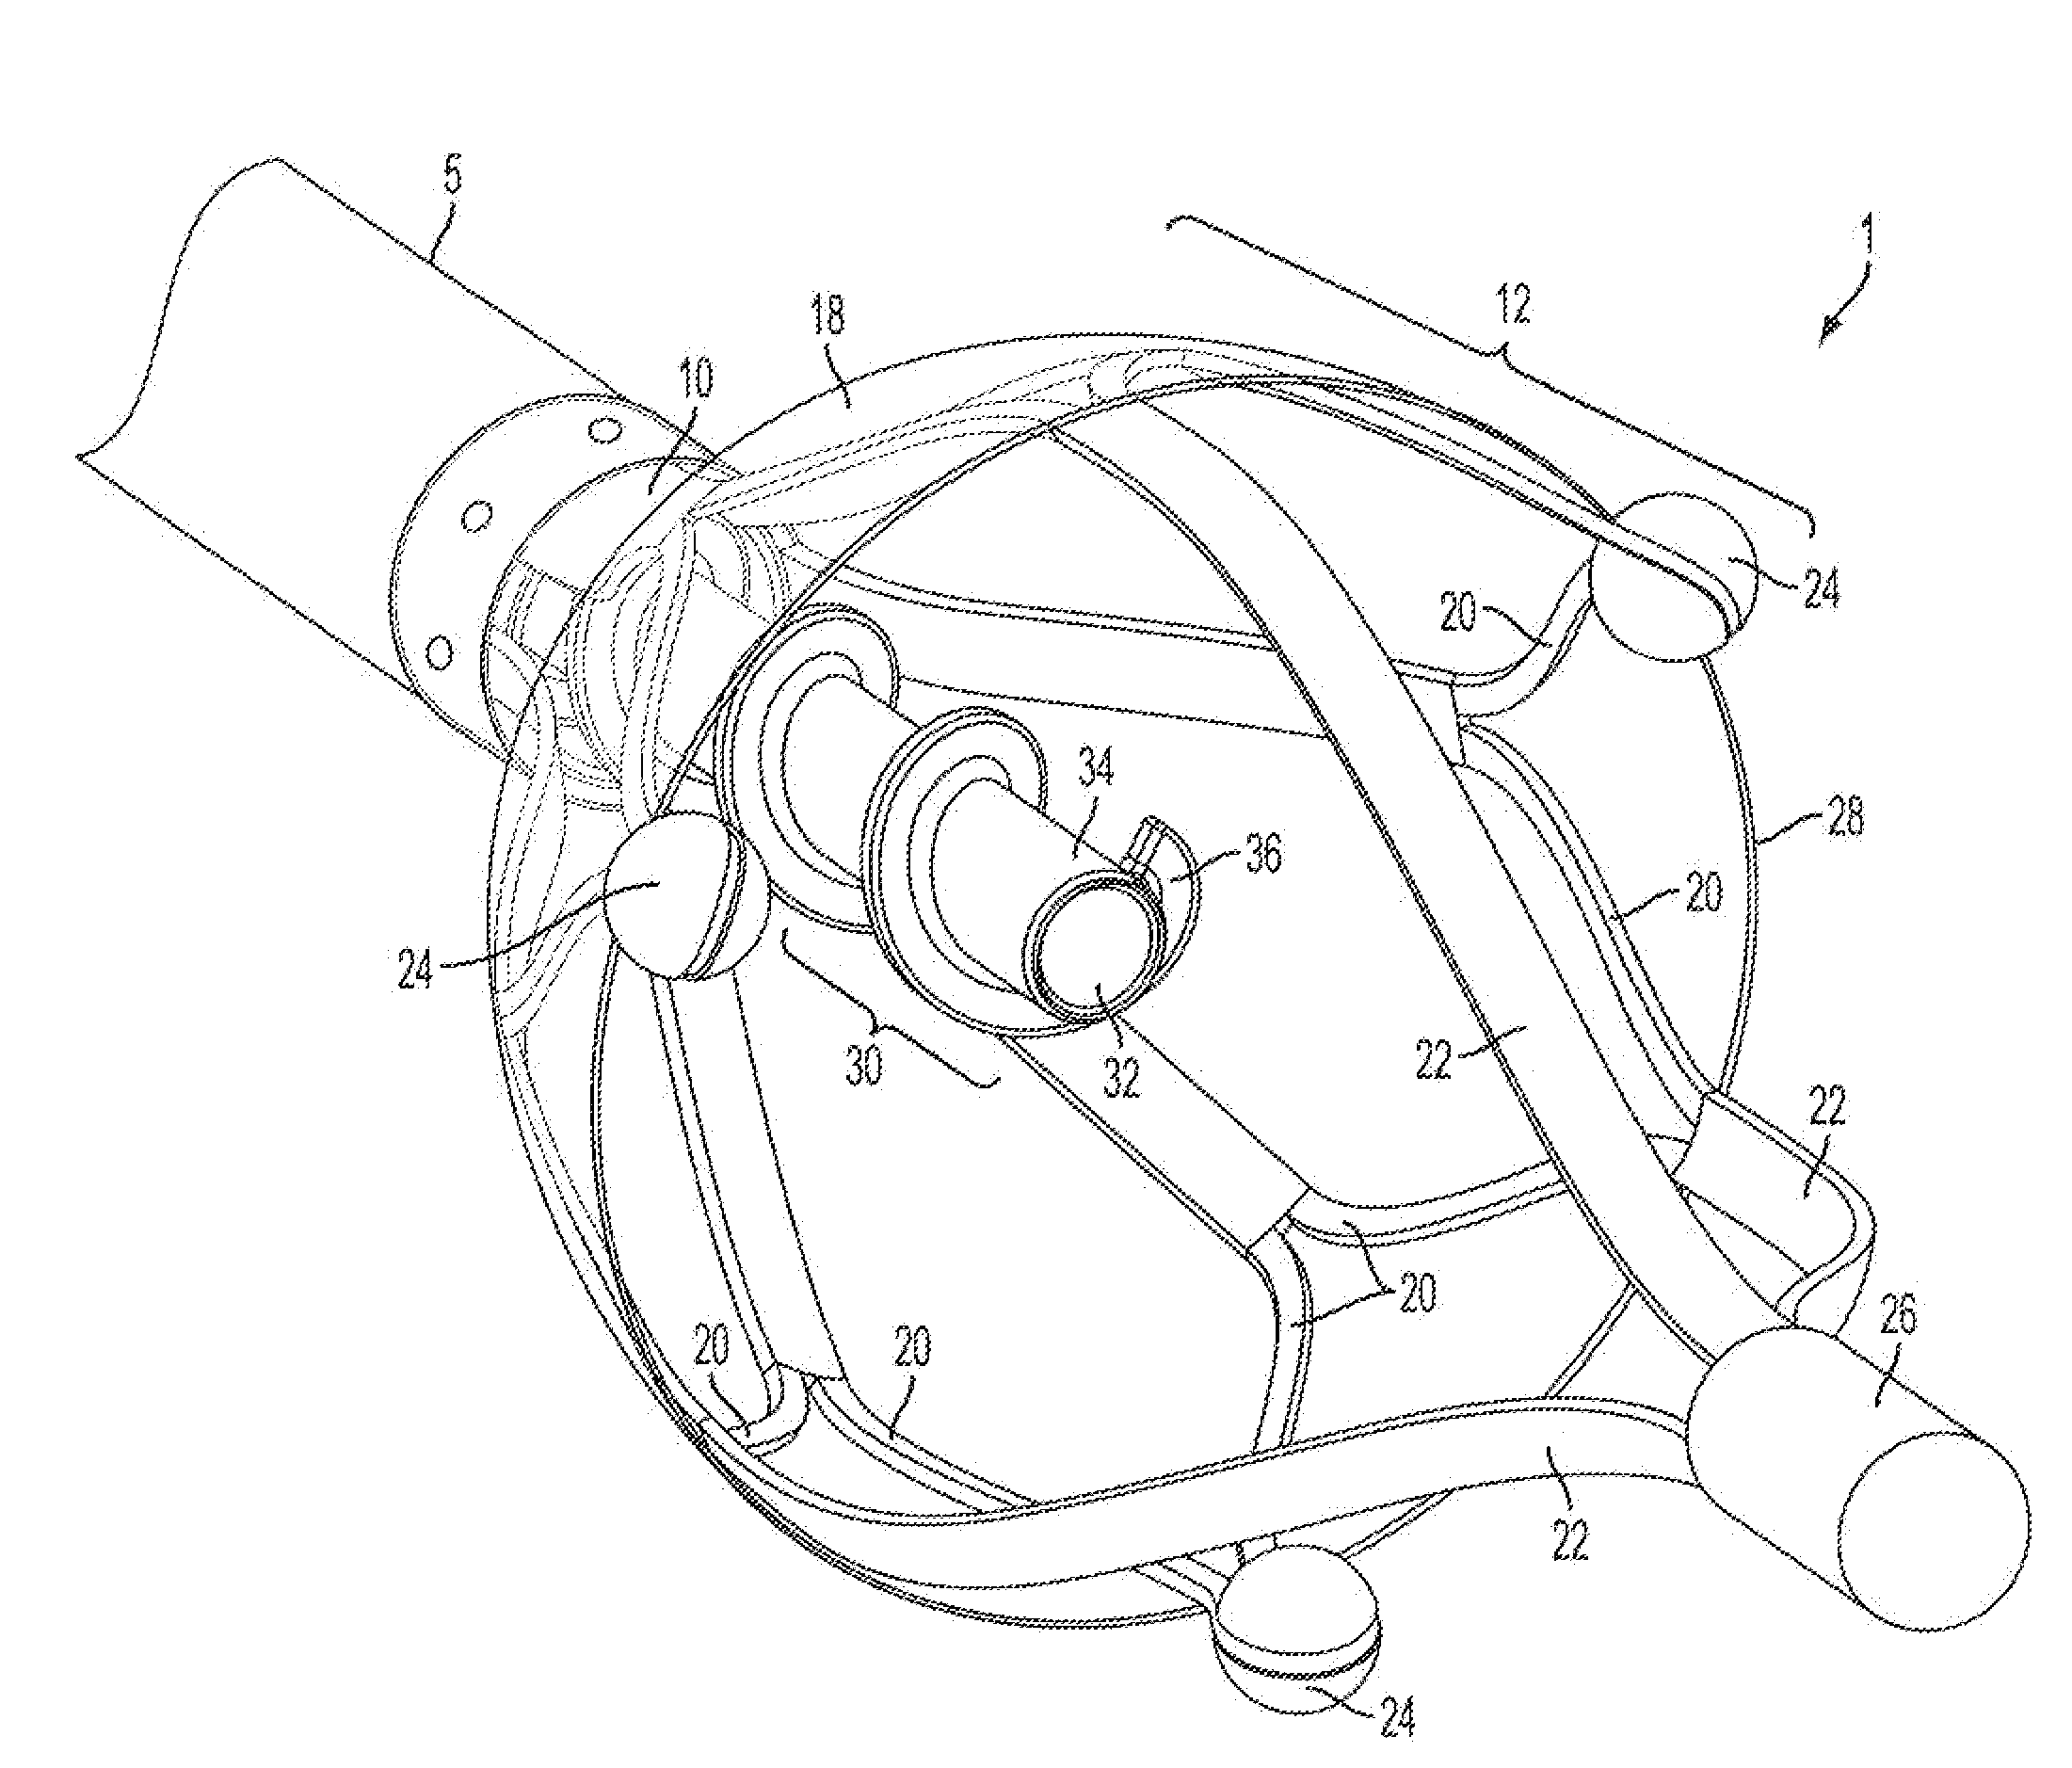 Device and method for removing material from a hollow anatomical structure